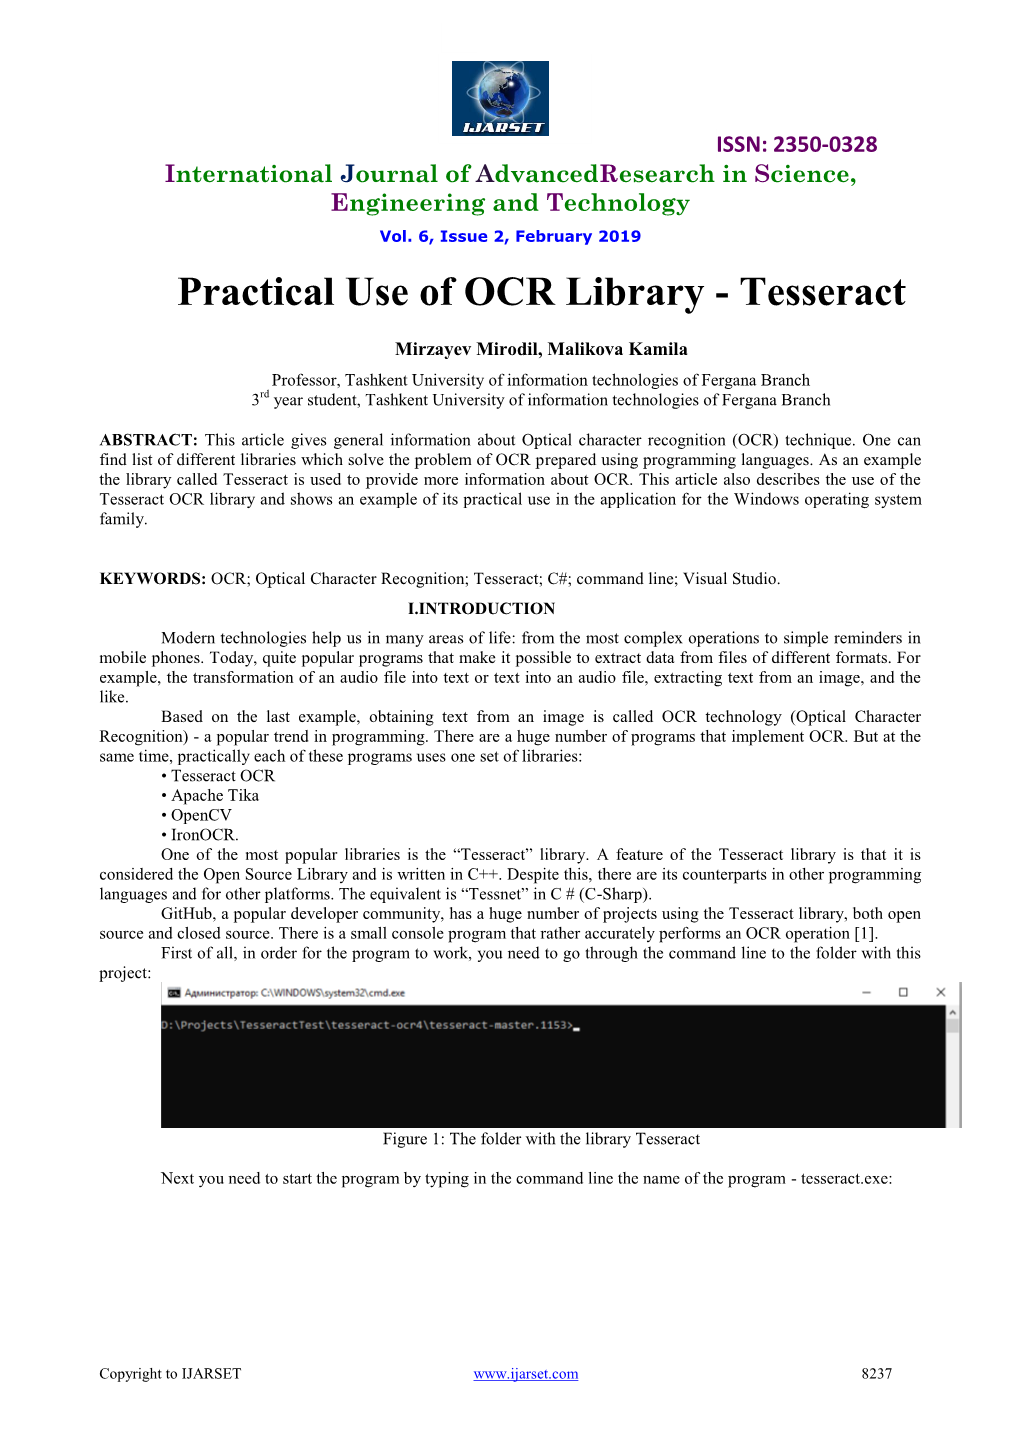 Practical Use of OCR Library - Tesseract